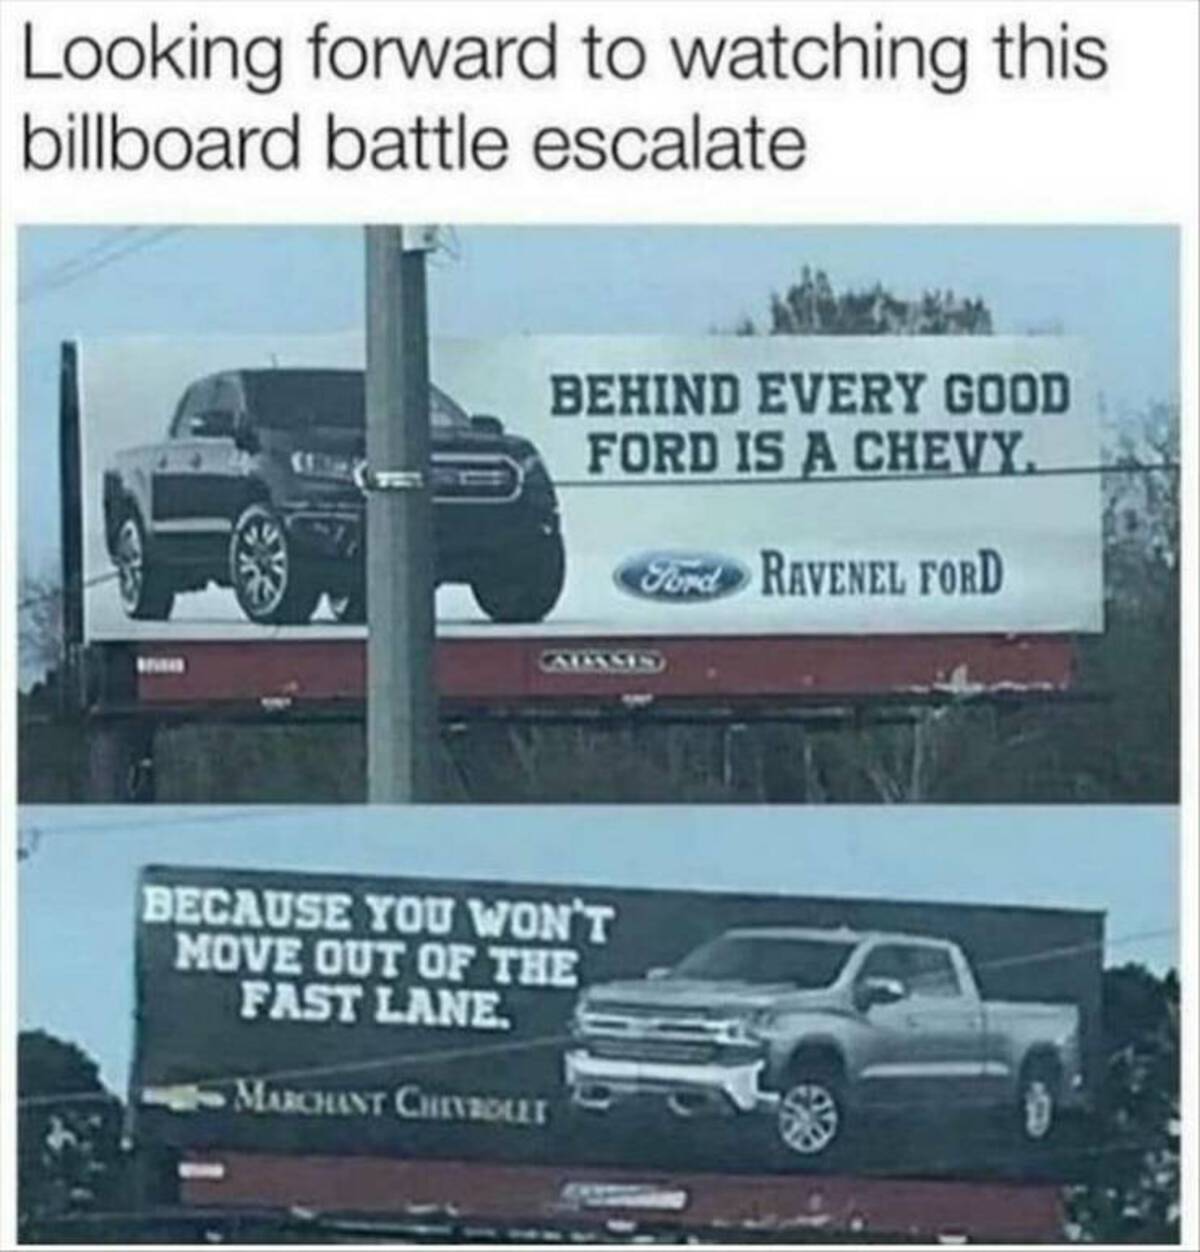 billboard - Looking forward to watching this billboard battle escalate Behind Every Good Ford Is A Chevy Ford Ravenel Ford Because You Won'T Move Out Of The Fast Lane. Marchant Chevrolet